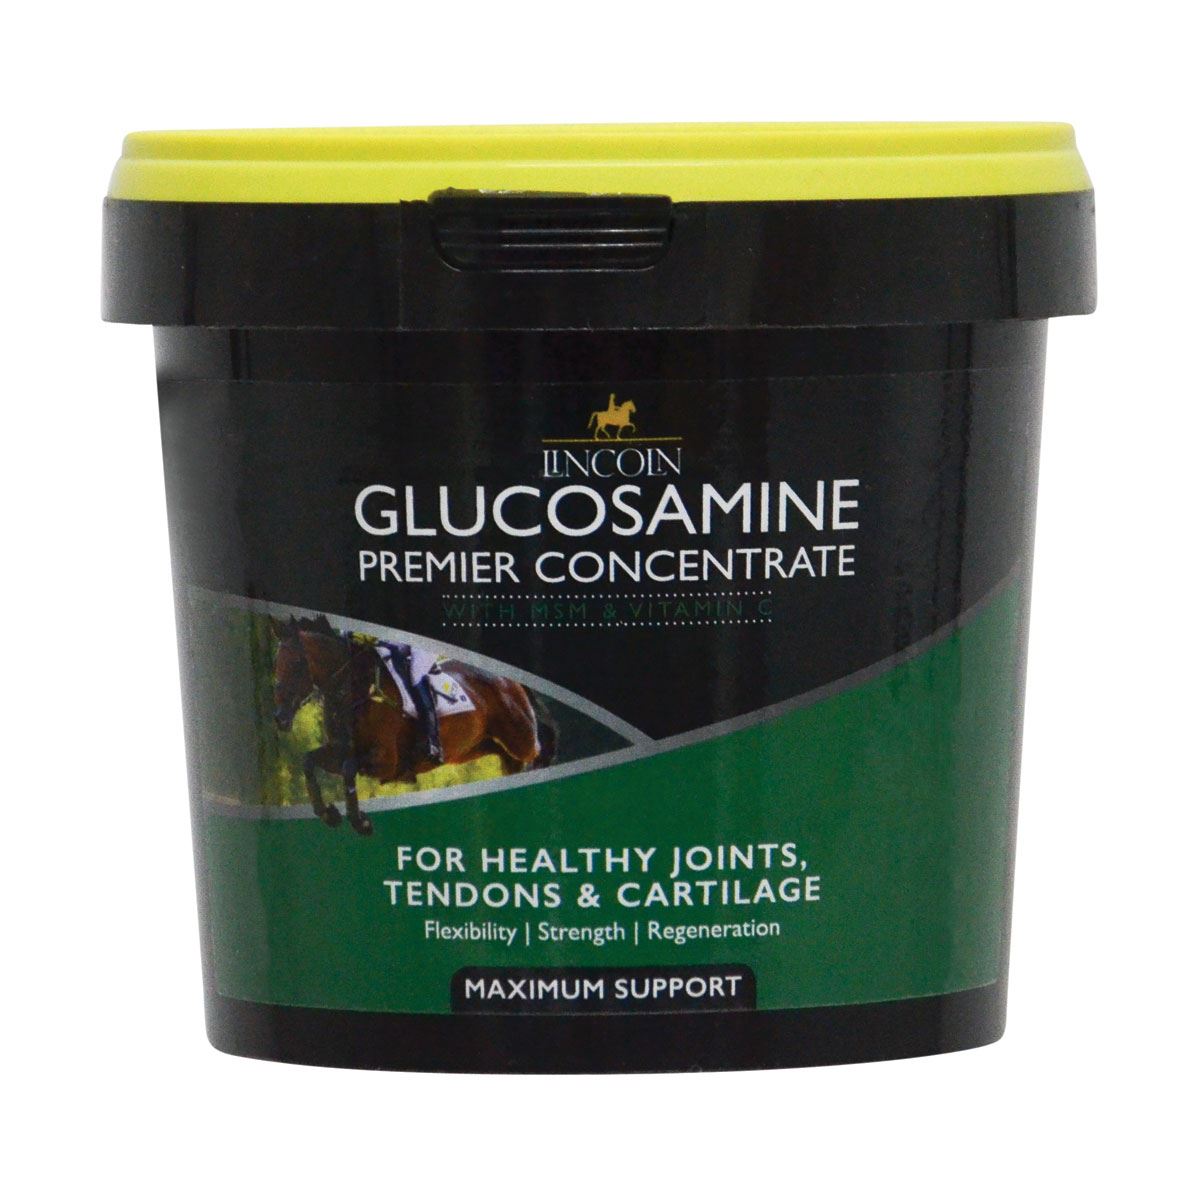 Lincoln Glucosamine Premier Concentrate for Optimal Joint Health